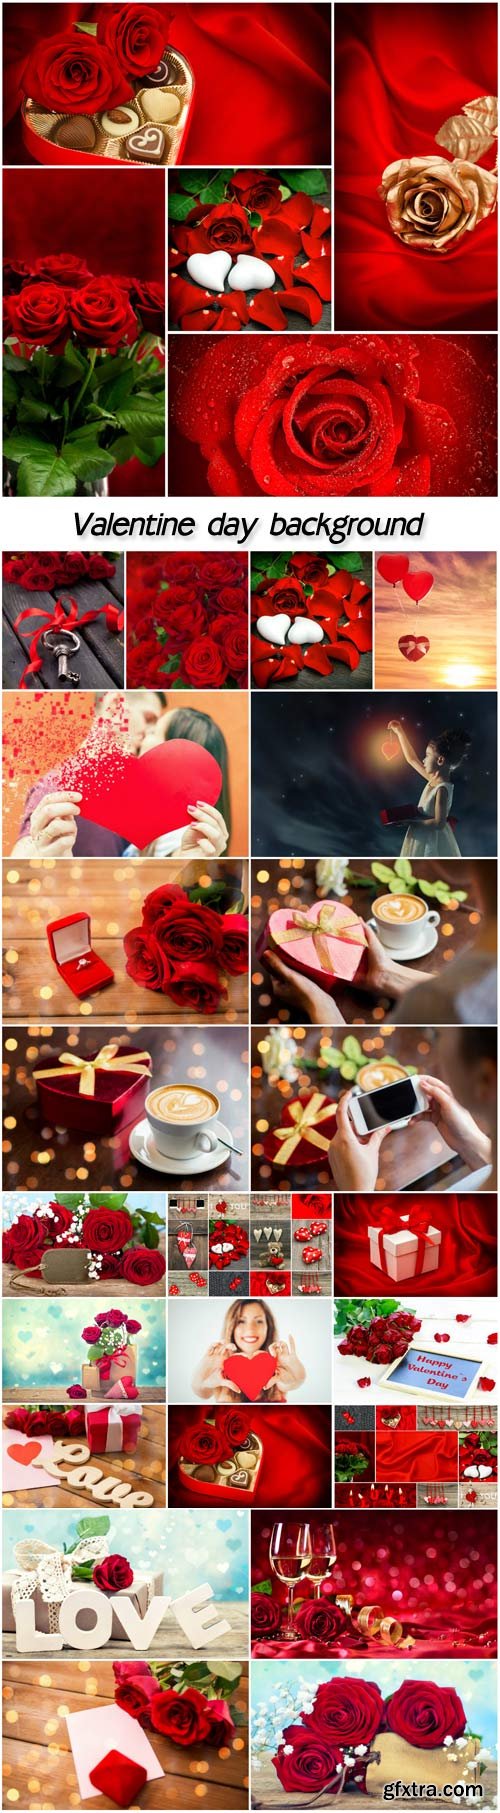 Valentine day background, champagne, gifts, chocolates, roses